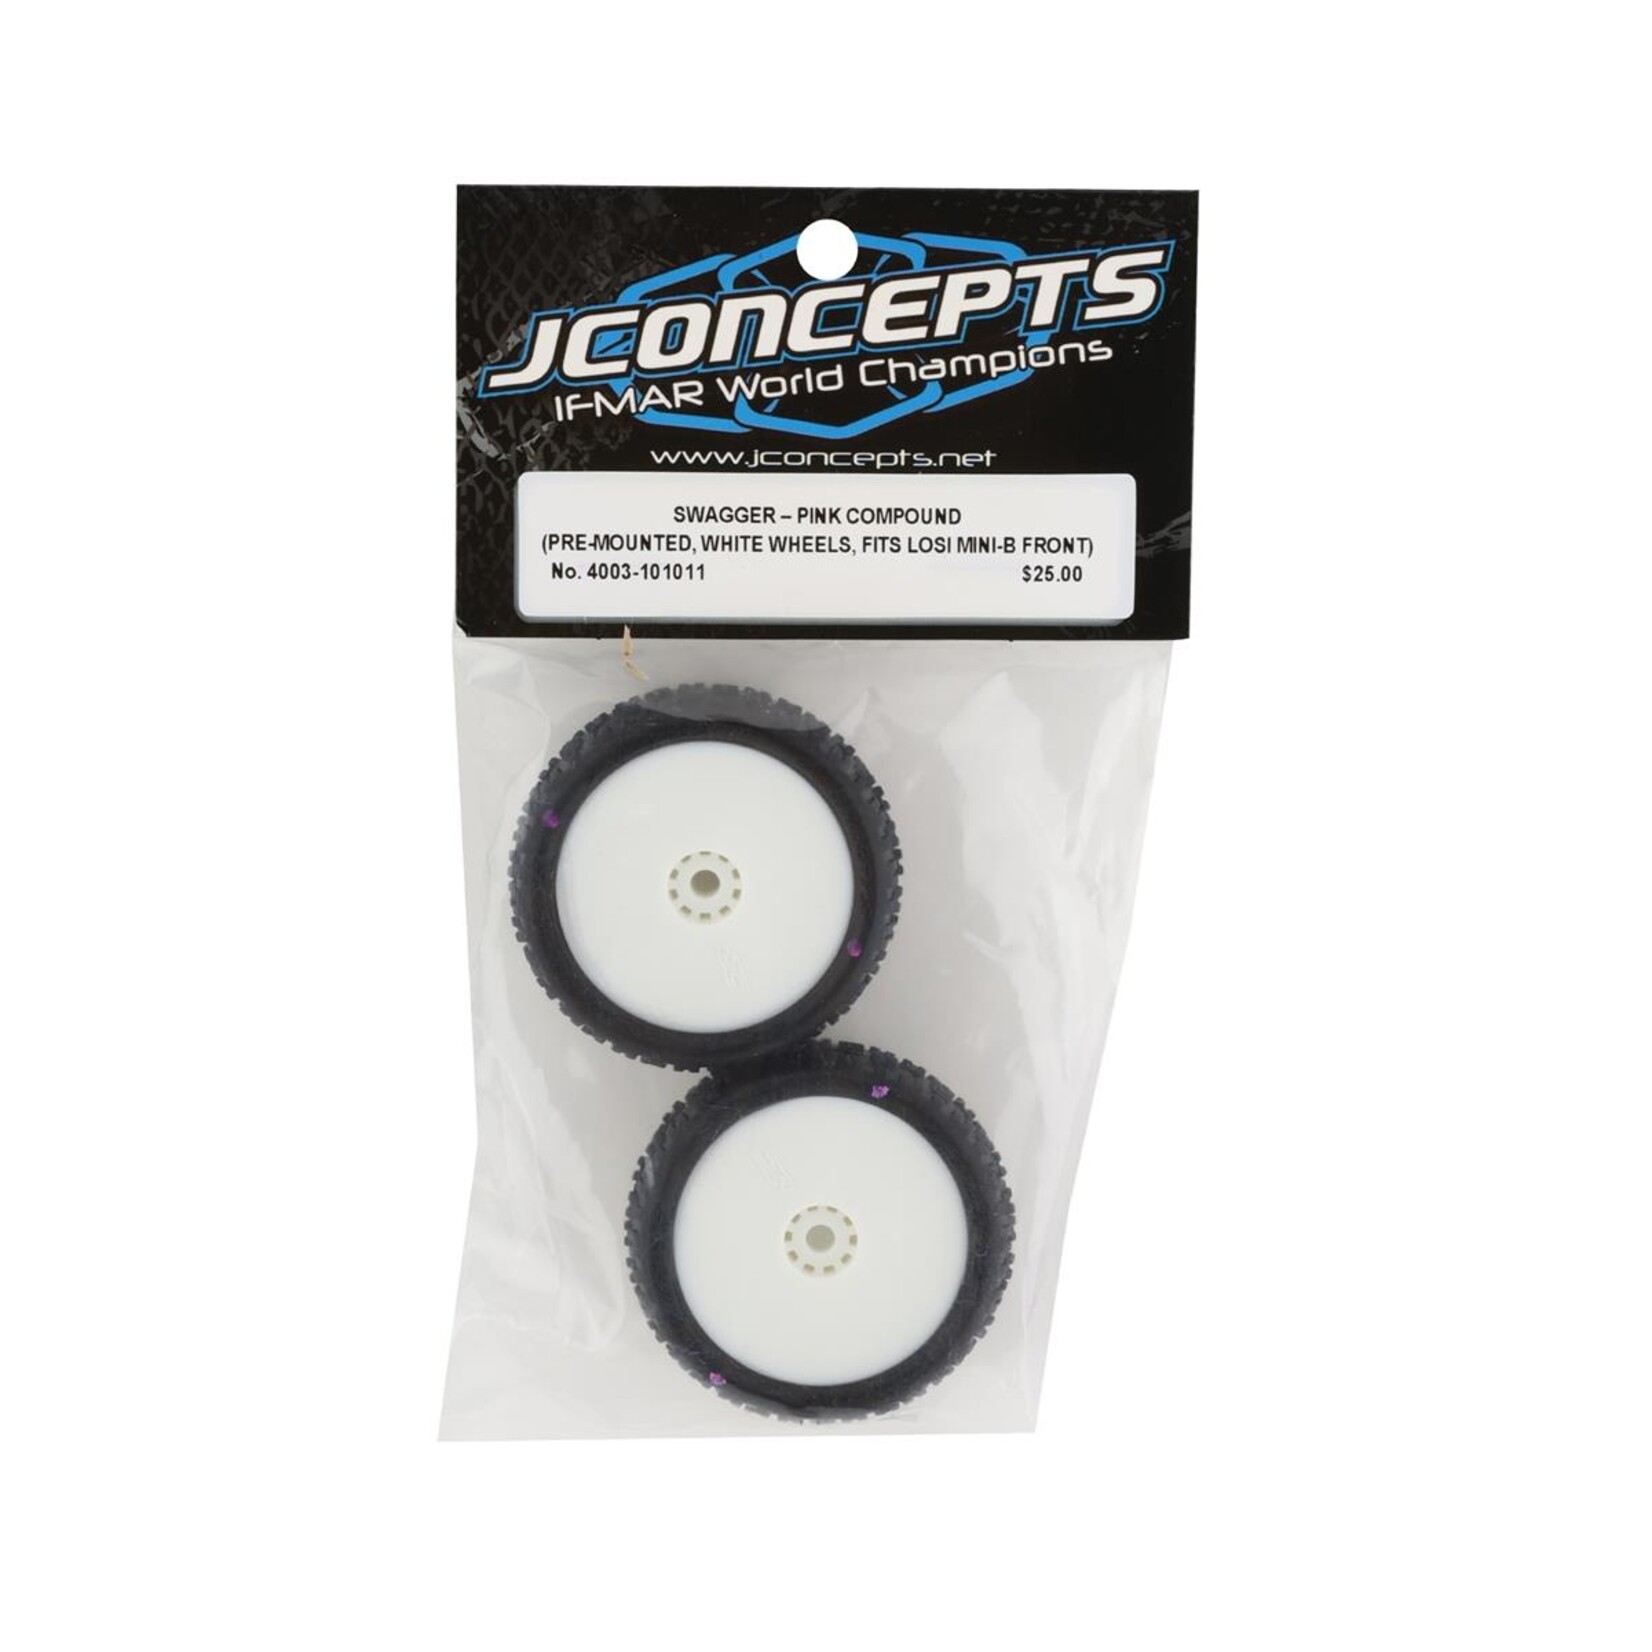 JConcepts JConcepts Mini-B Swagger Pre-Mounted Front Tires (White) (2) (Pink) #4003-101011